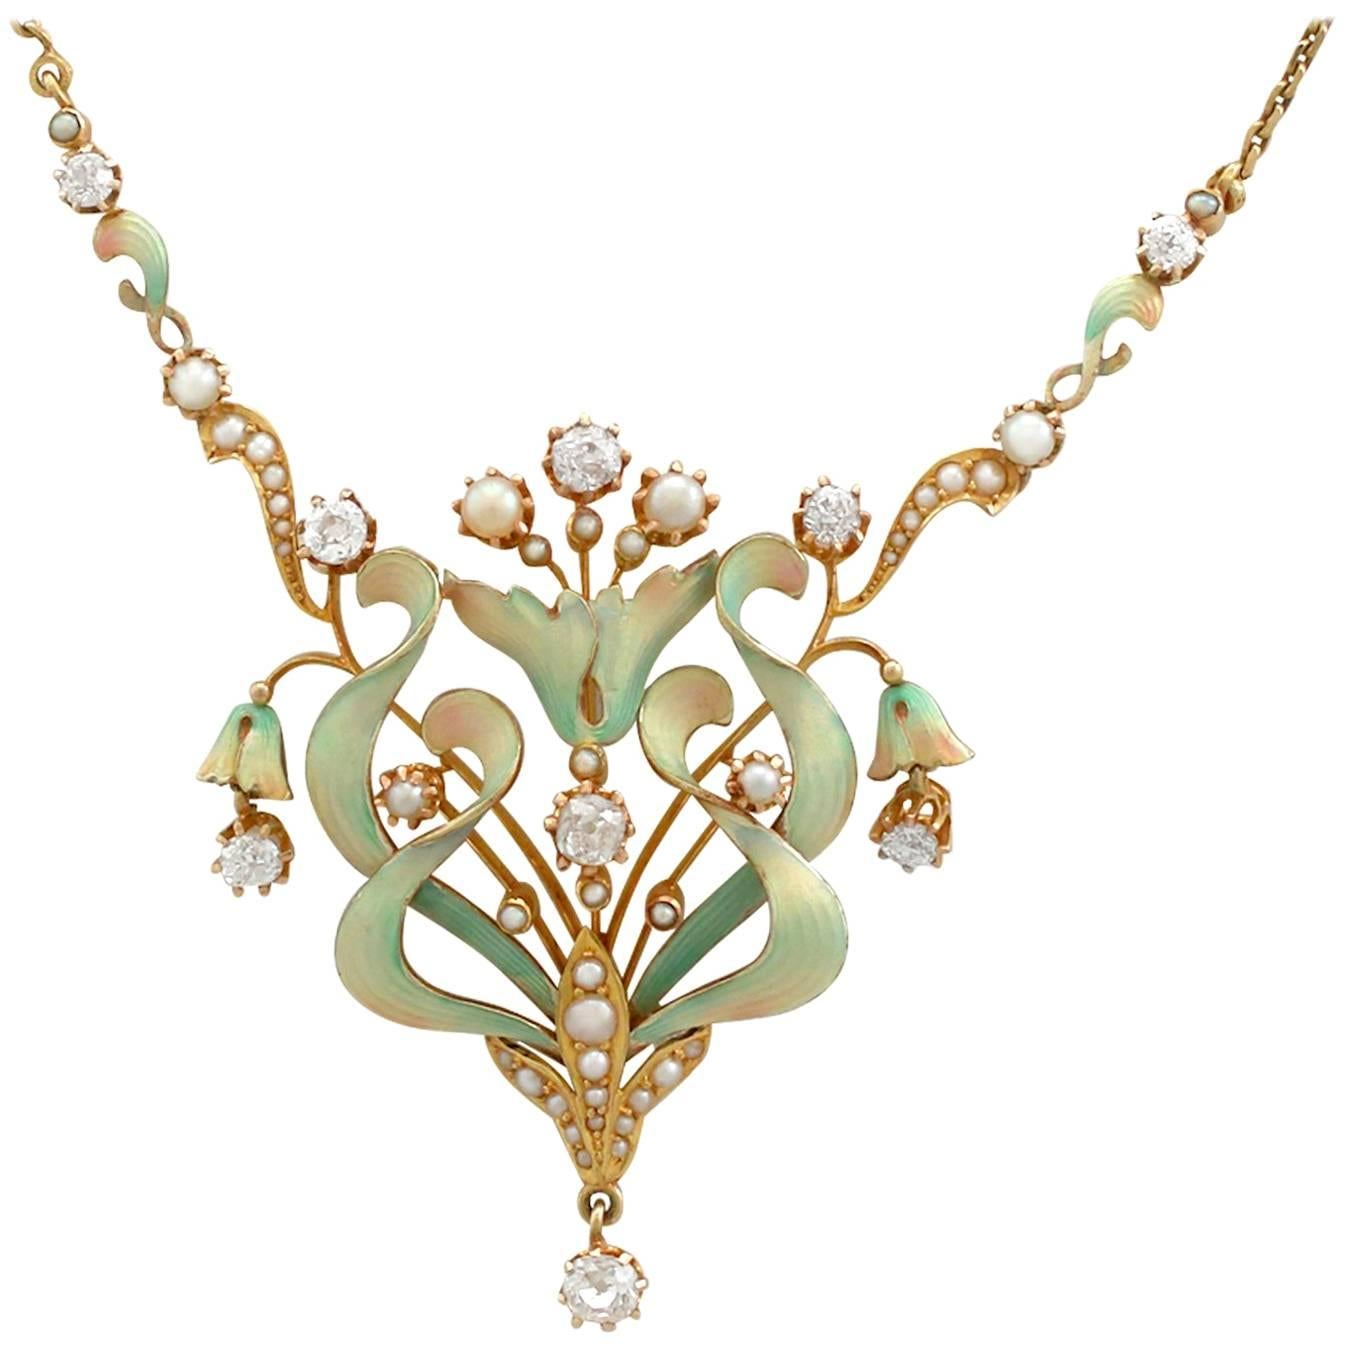 1900s 1.42 Carat Diamond and Seed Pearl Enamel Yellow Gold Necklace